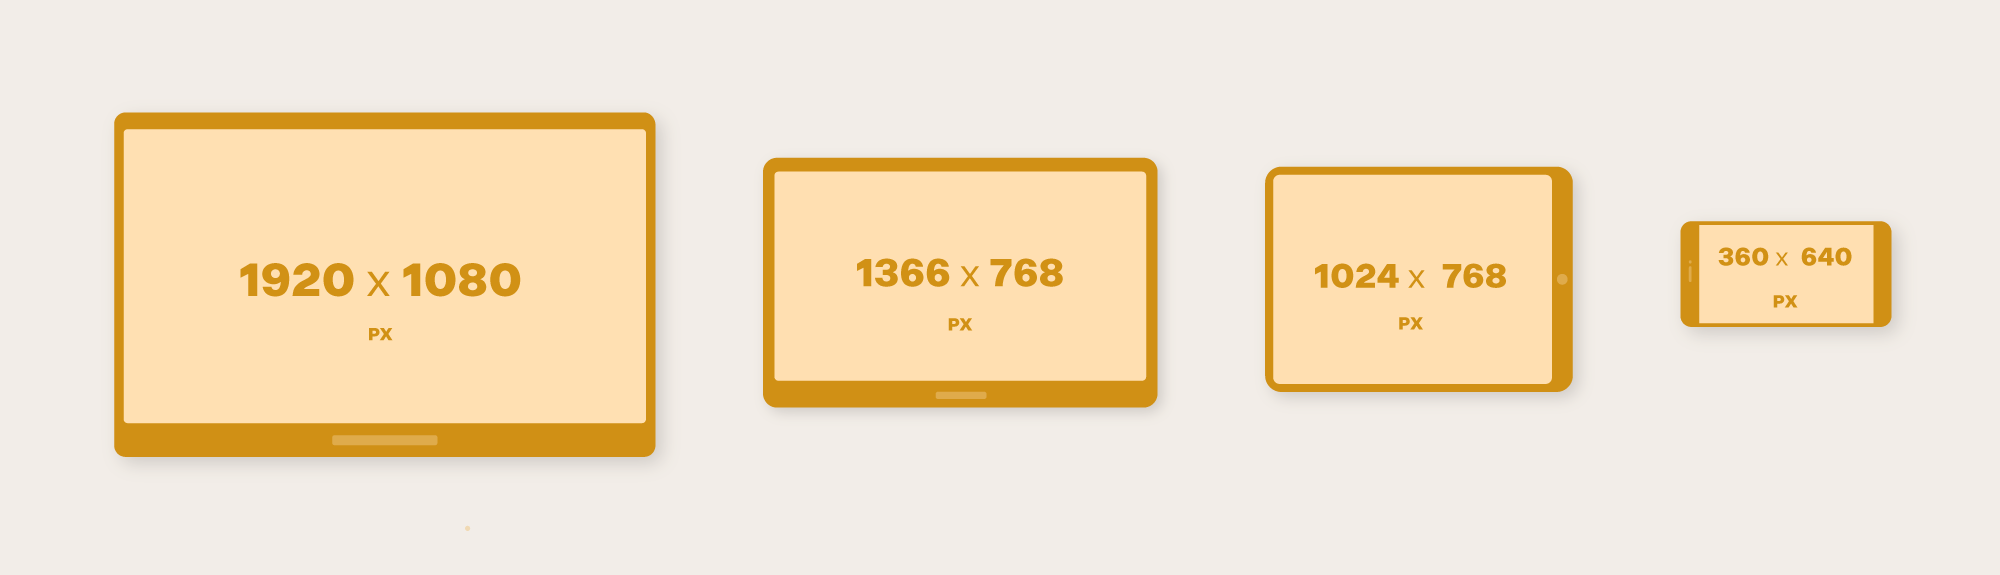 Different screen sizes and their pixel dimensions